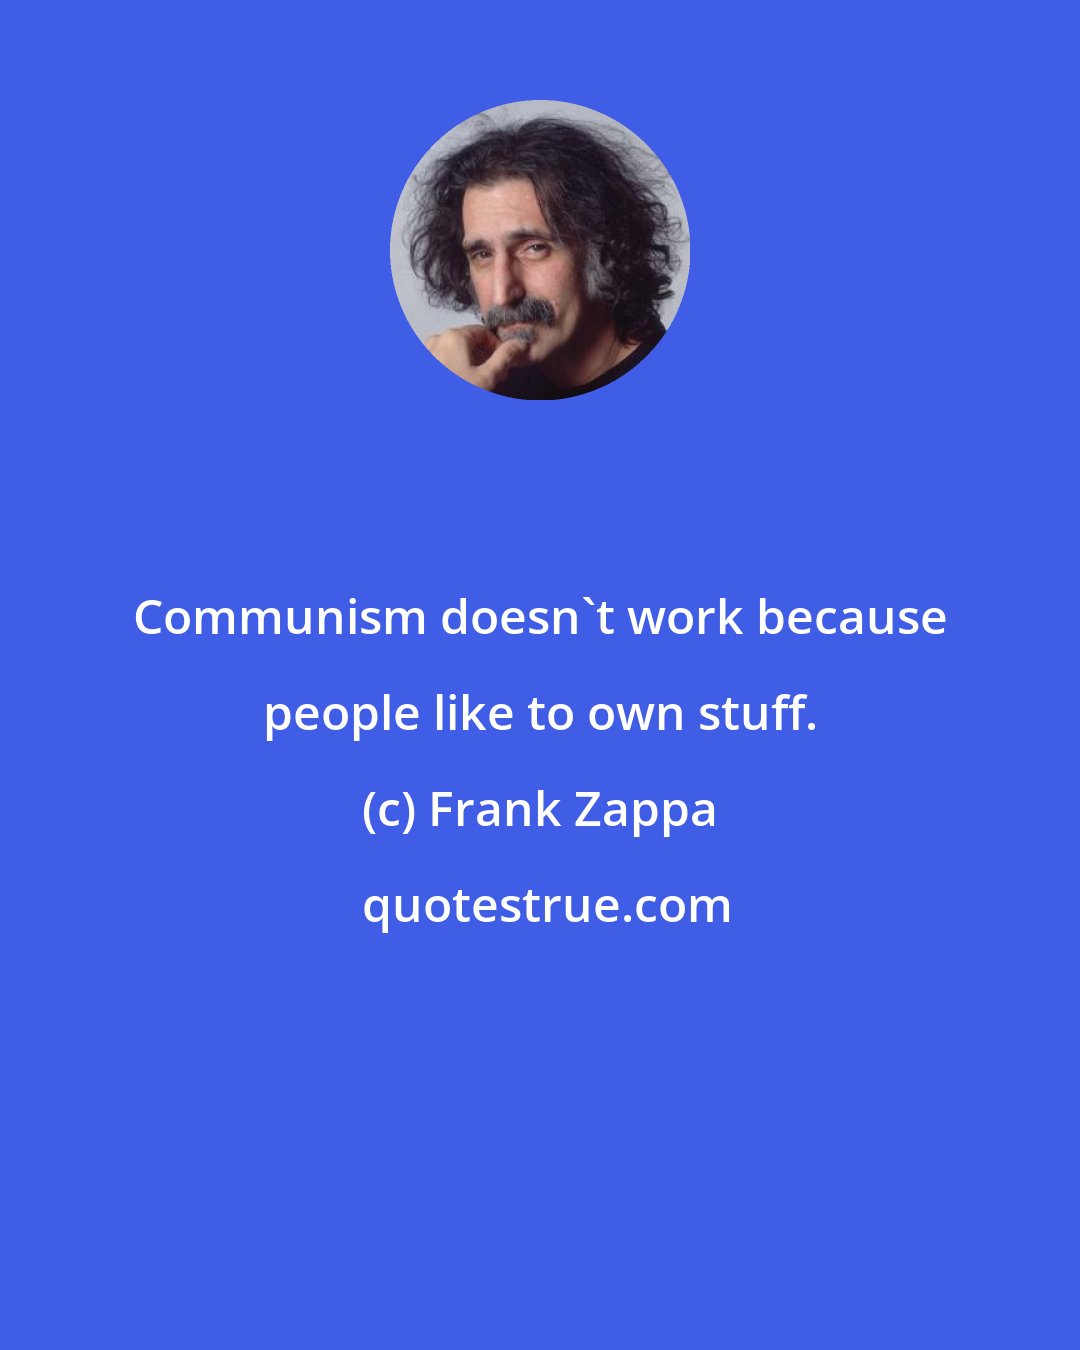 Frank Zappa: Communism doesn't work because people like to own stuff.